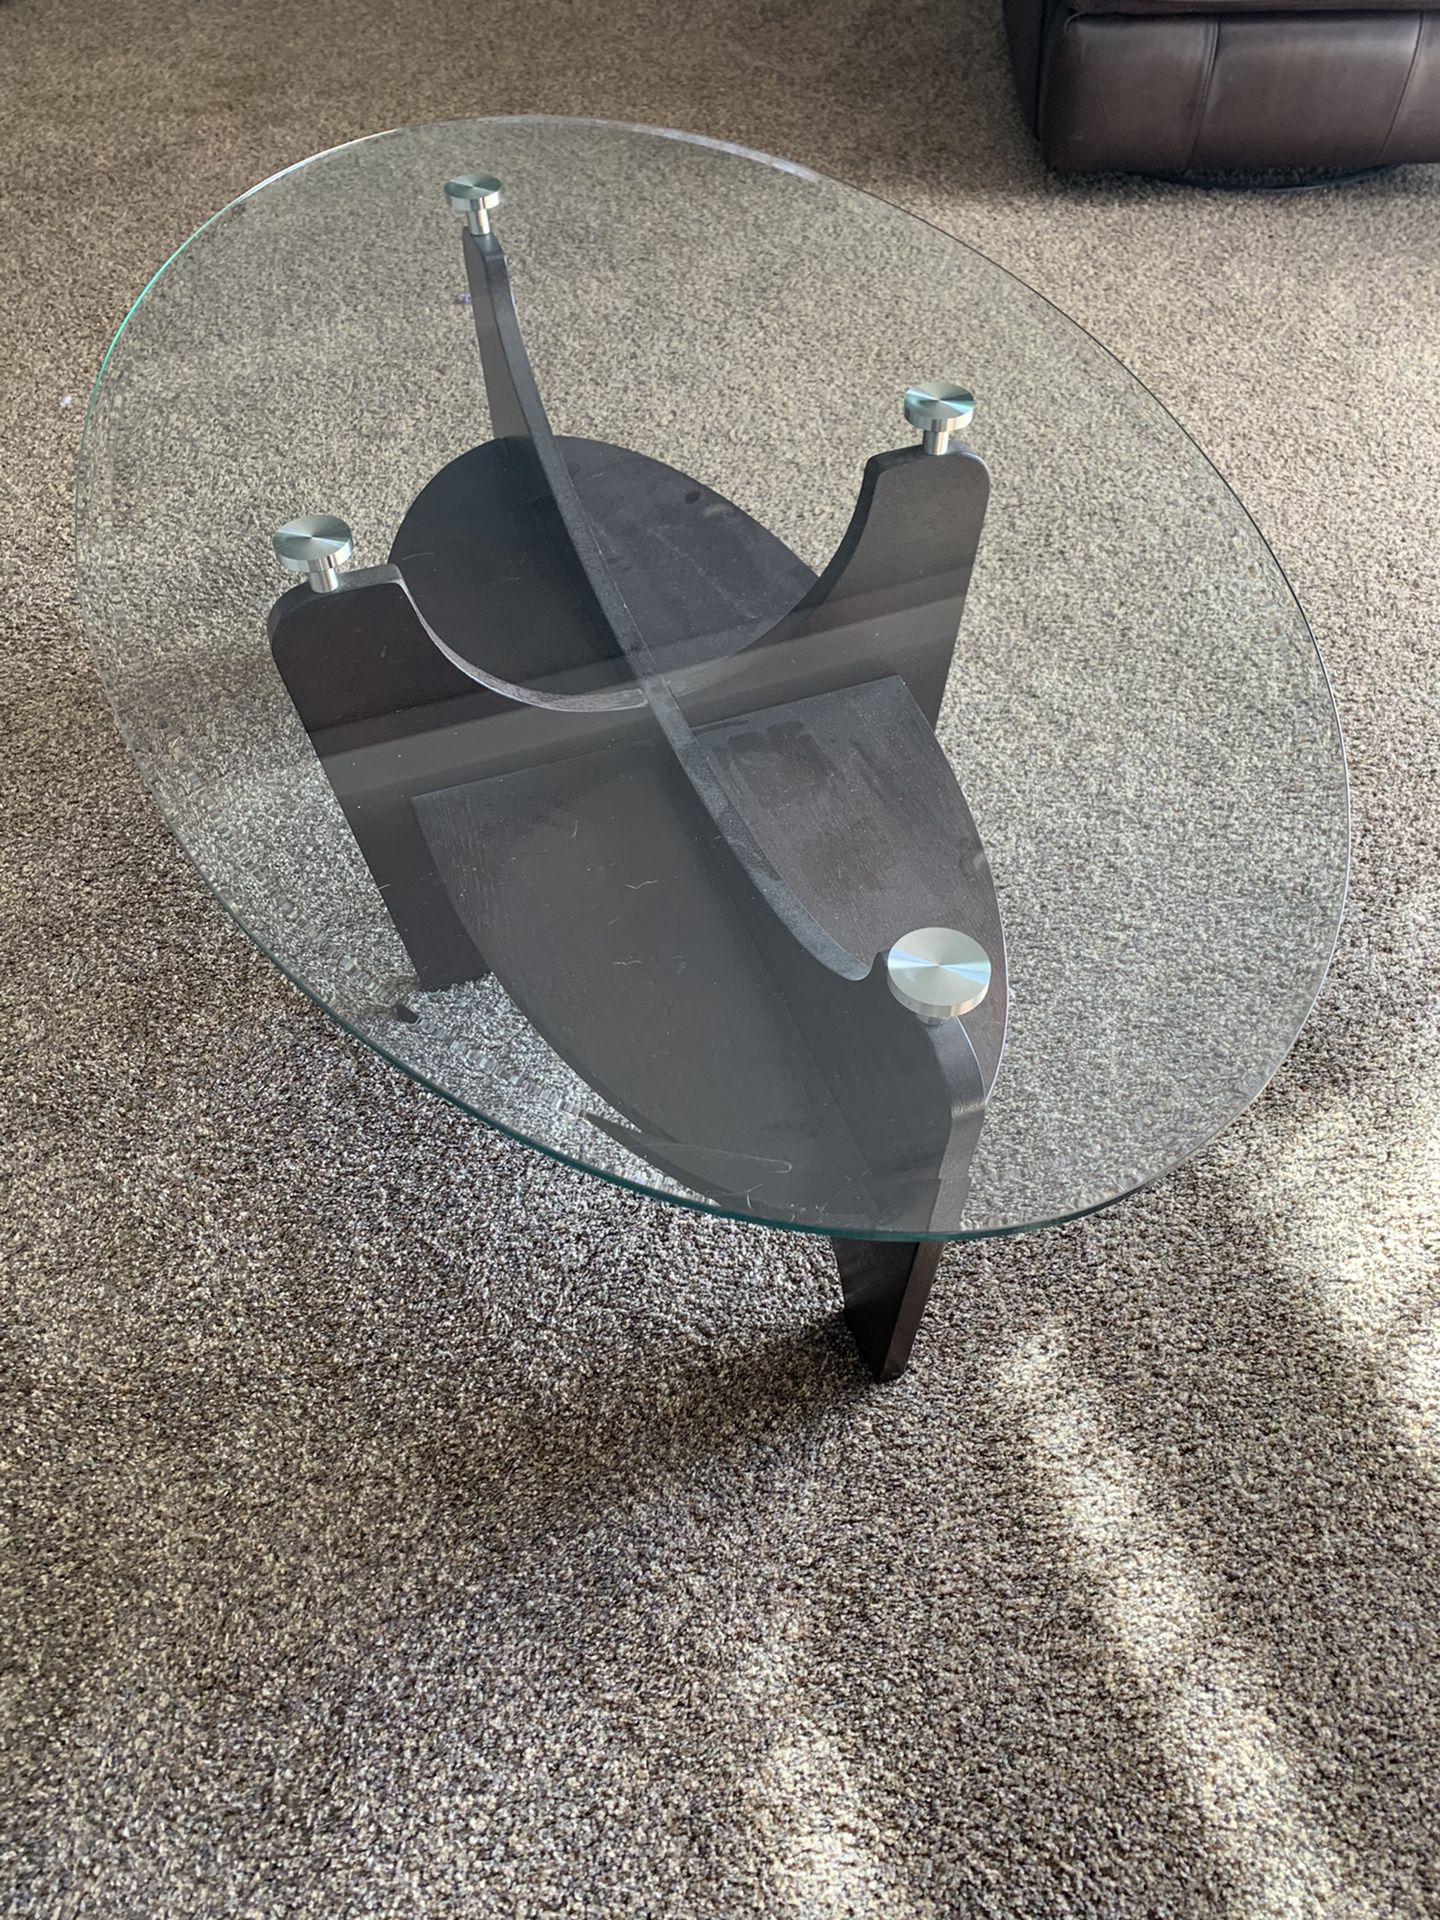 Glass Topped Coffee Table